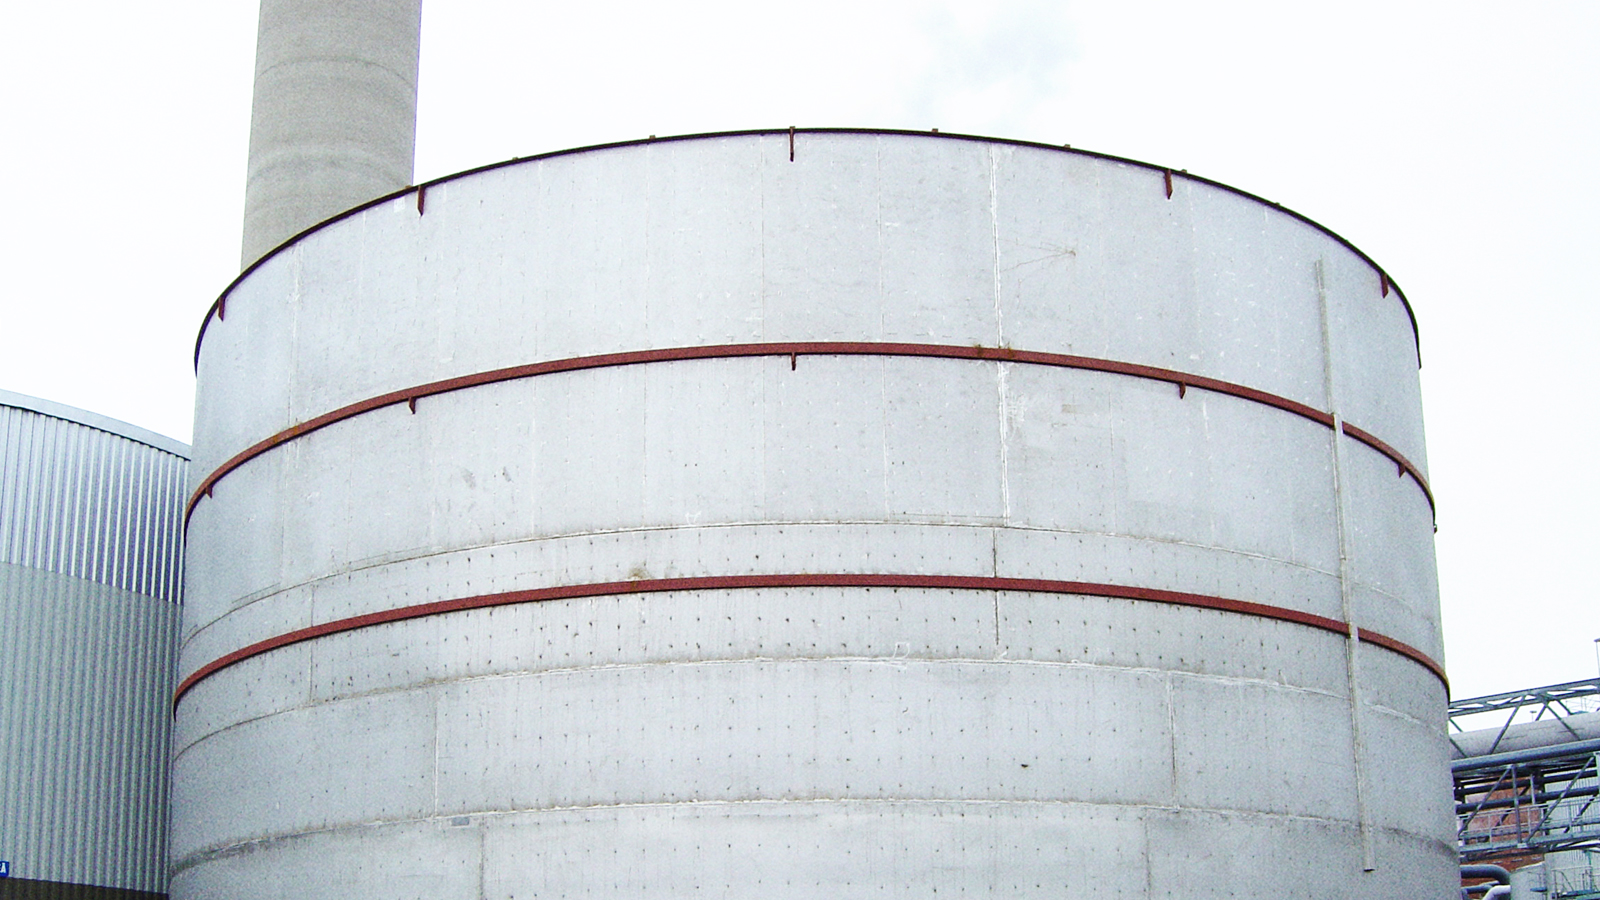 White liquor tank at the Stora Enso mill in Imatra, Finland constructed in 2004 using hot-rolled lean duplex 1.4162 / 2101.